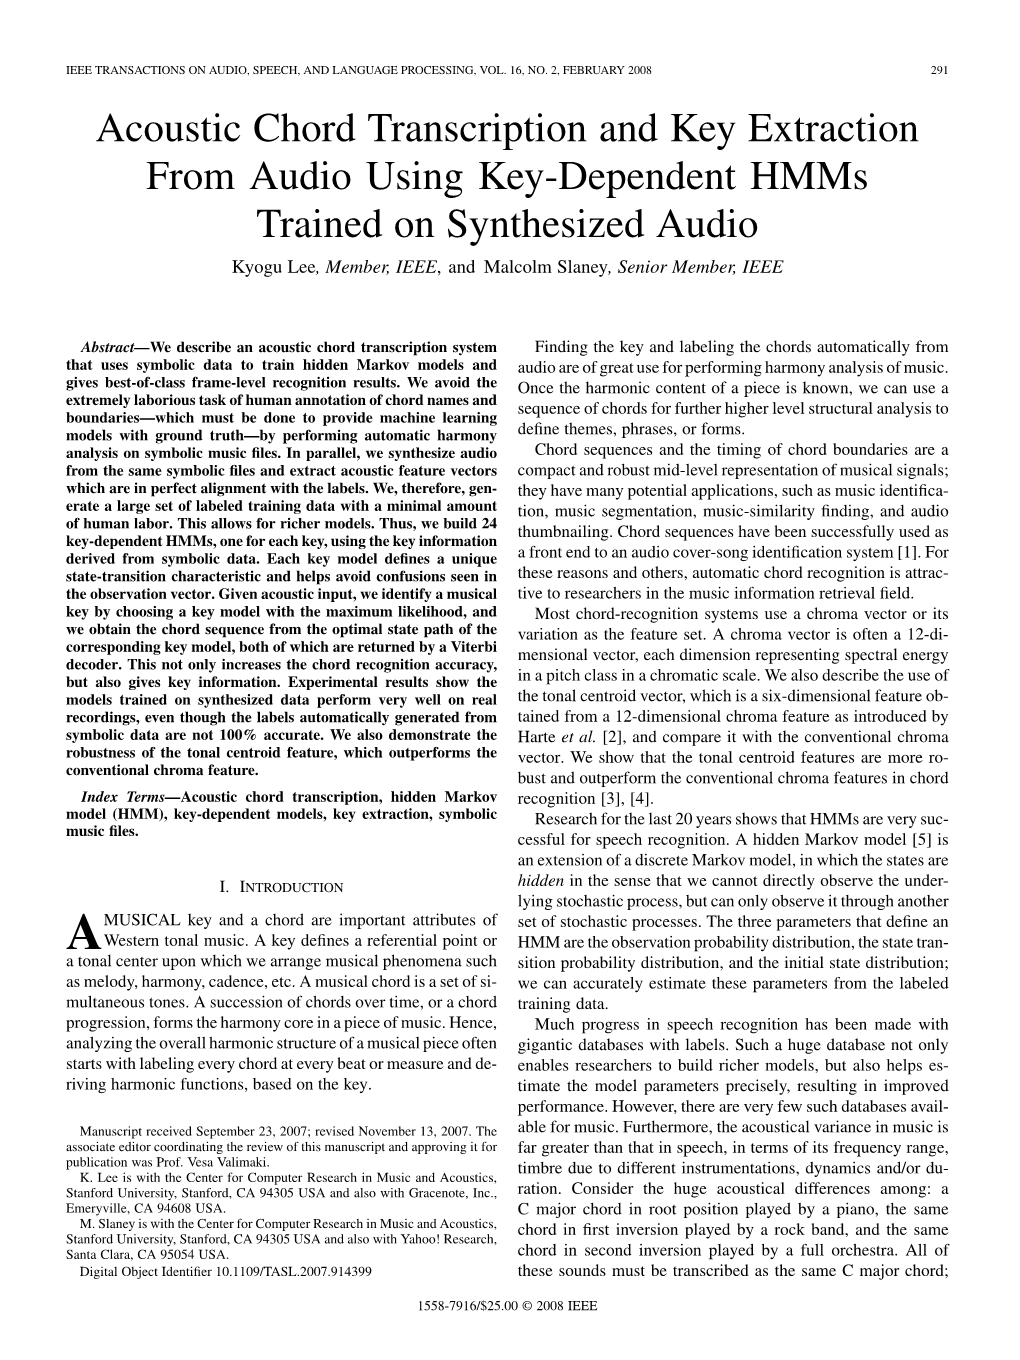 Acoustic Chord Transcription and Key Extraction from Audio Using Key-Dependent Hmms Trained on Synthesized Audio